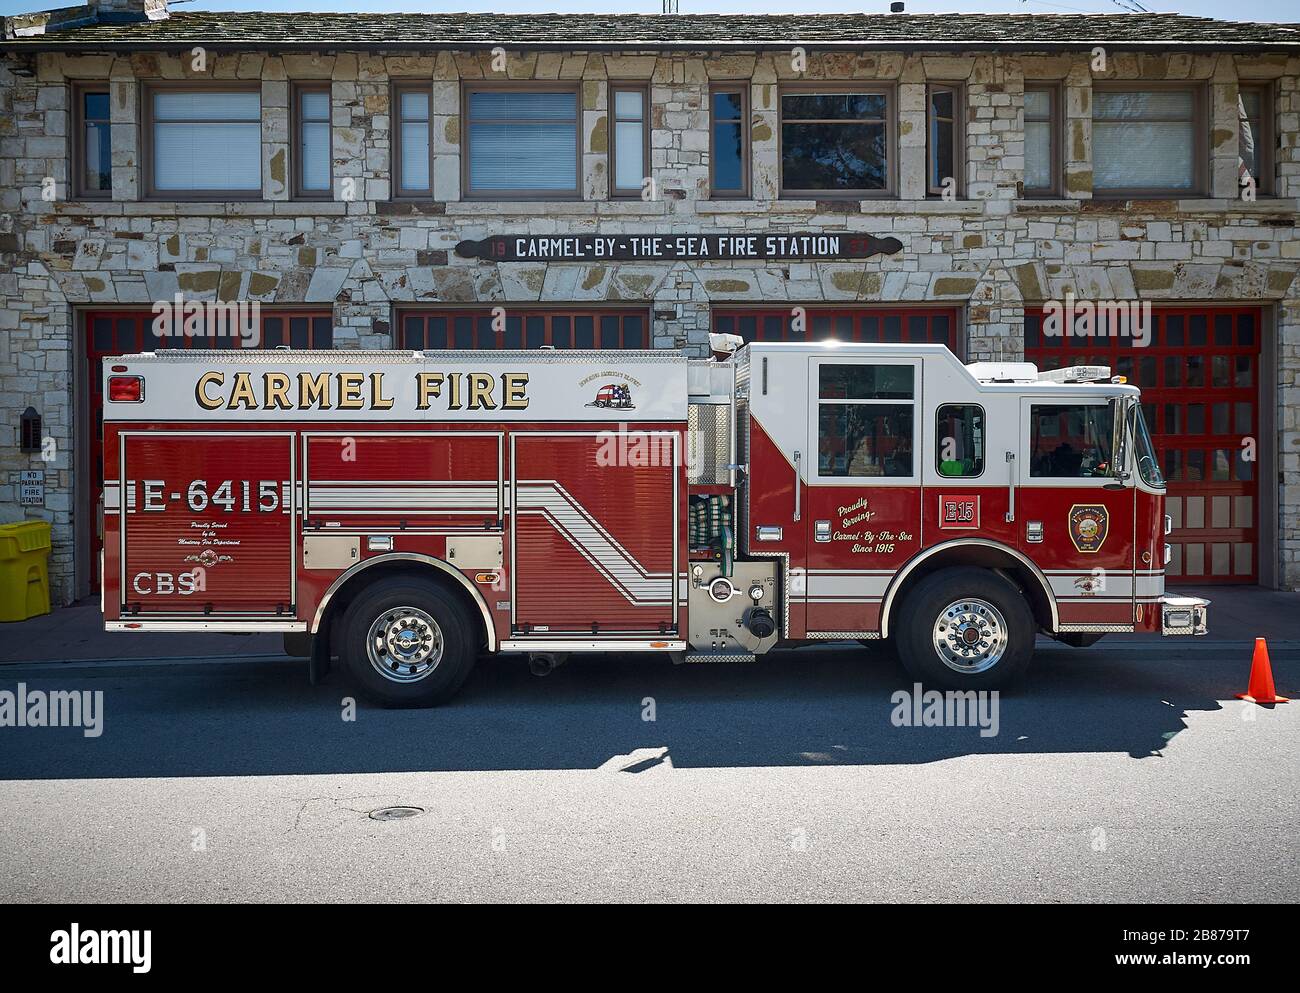 A proper fire truck in front of the fire station of Carmel-by-the- Sea. Stock Photo